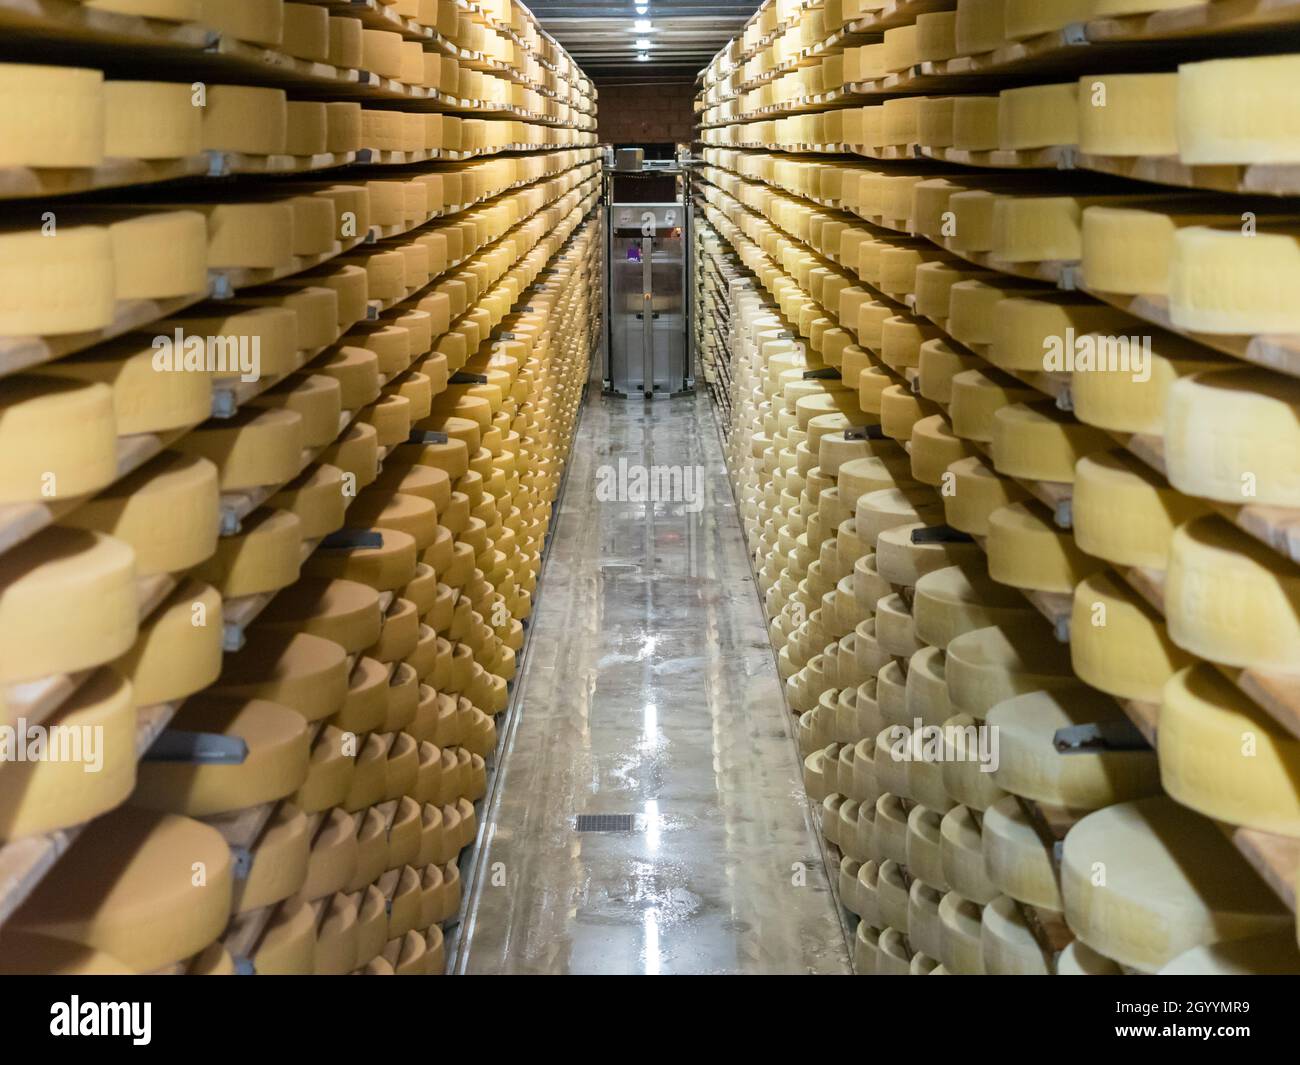 Long rows with large wheels of Swiss Gruyere cheese are maturing at the cheese diary at Gruyere, Switzerland. Stock Photo